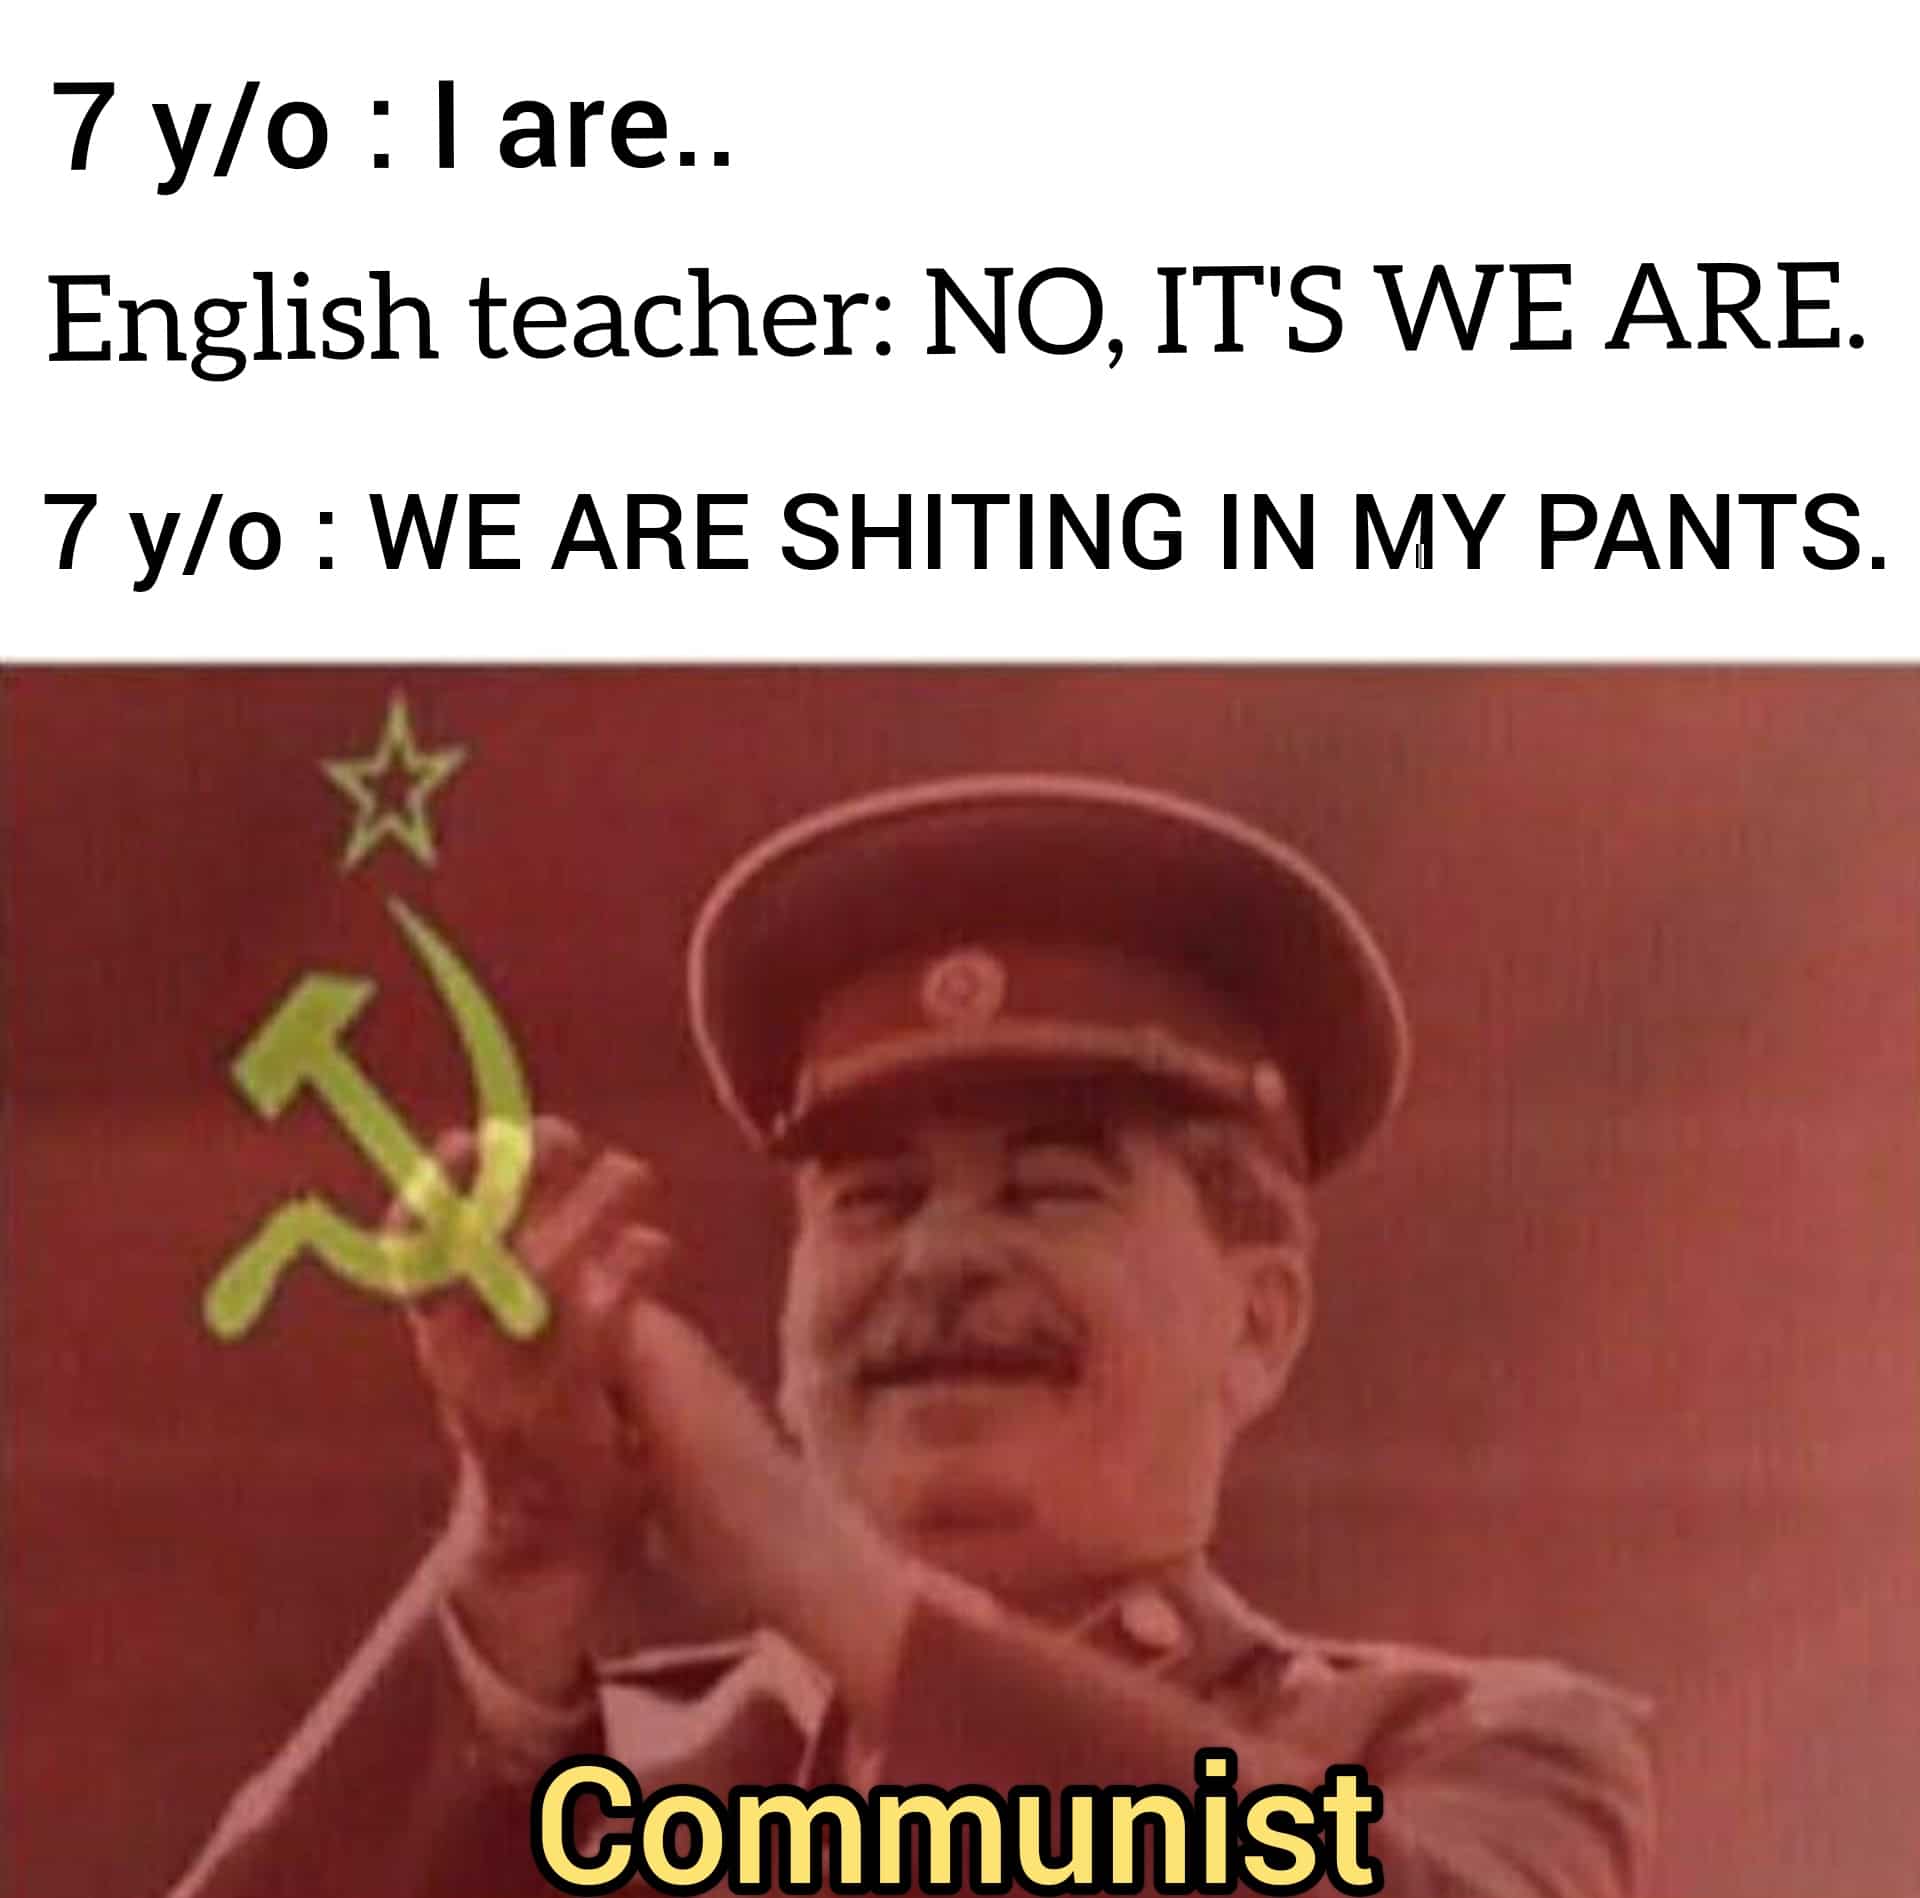 Cute, Timmy, Teacher, MtQs Dank Memes Cute, Timmy, Teacher, MtQs text: 7 y/o : I are.. English teacher: NO, ITS WE ARE. 7 y/o : WE ARE SHITING IN MY PANTS. Communist 